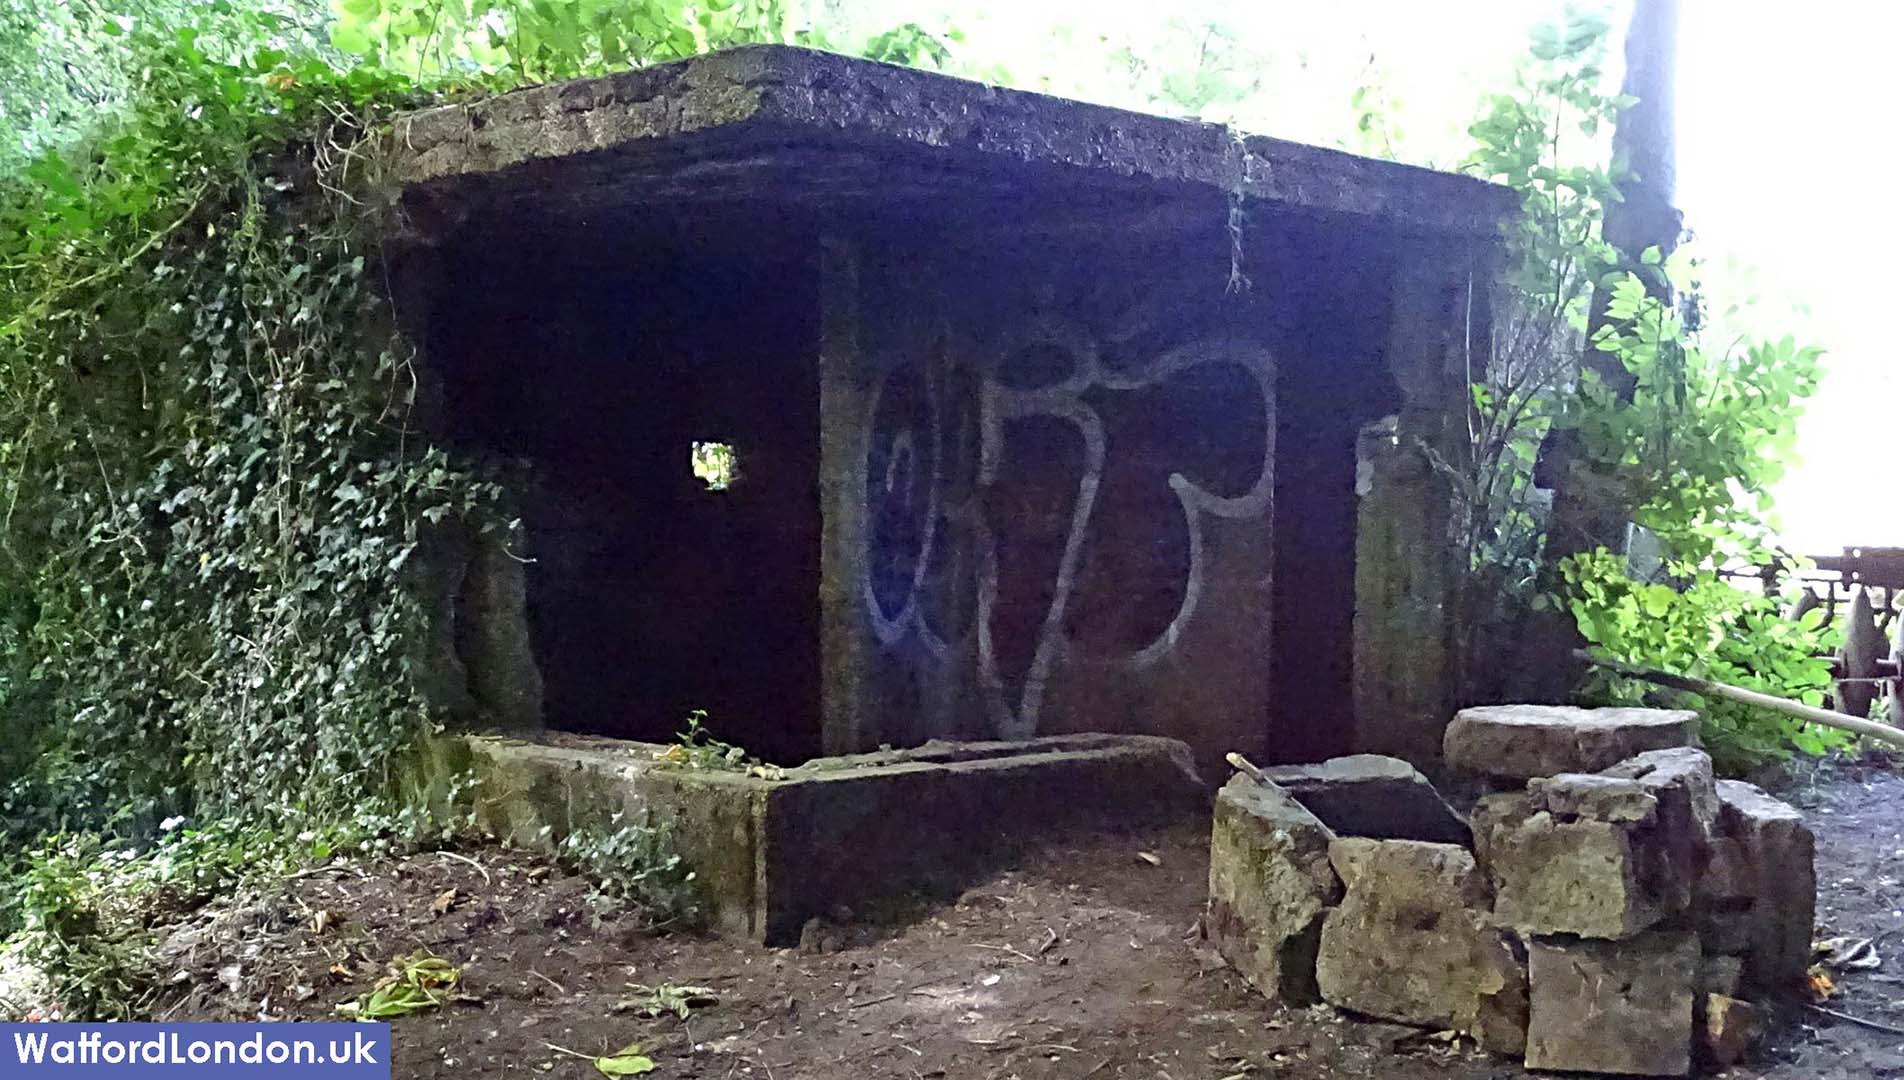 Old War shelter being used as Rural Drug Den at historic hospital cemetery